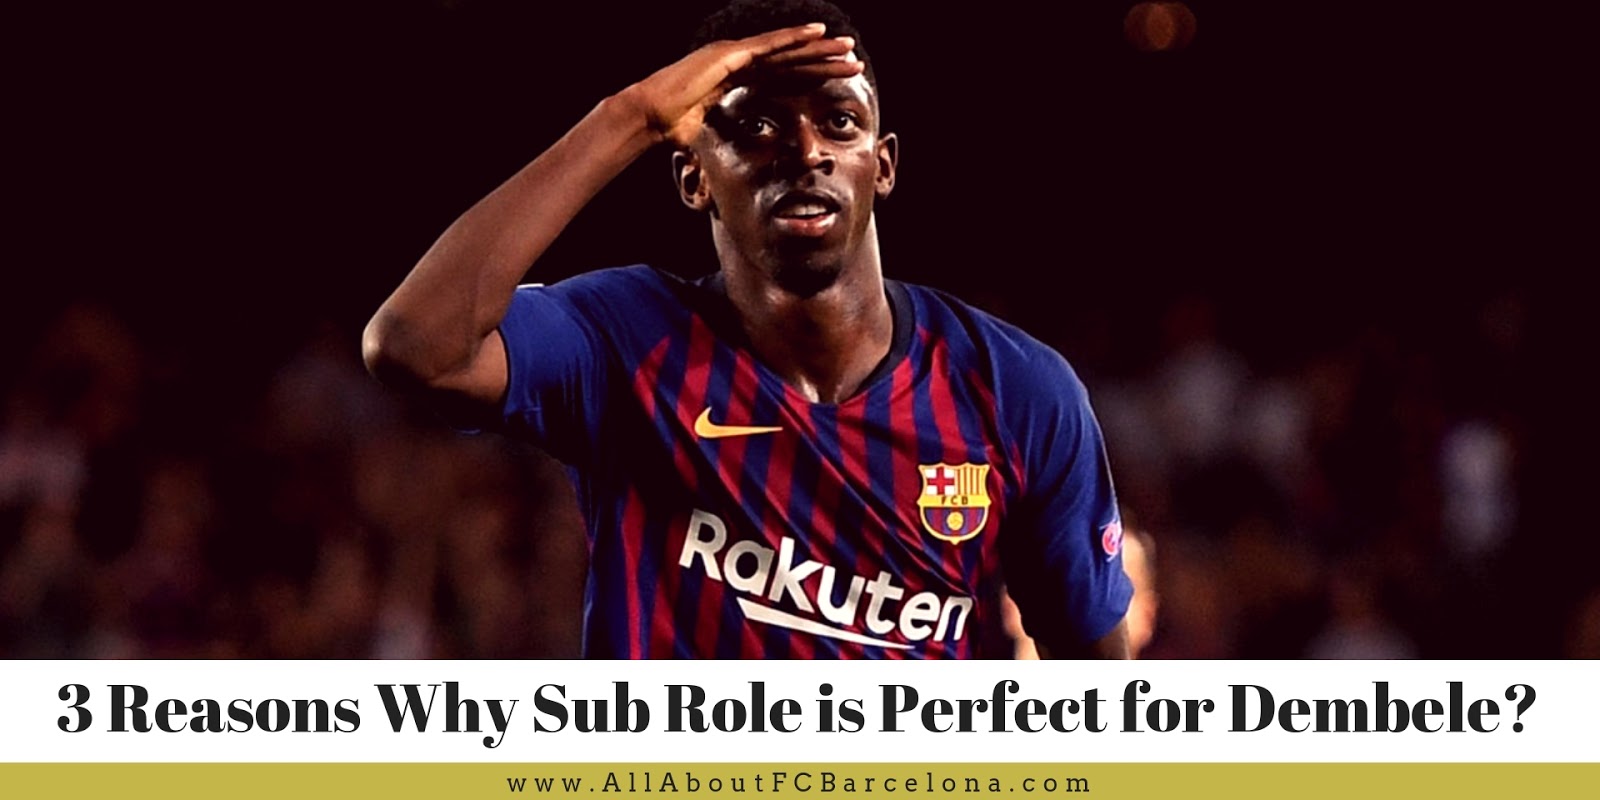 3 Simple Reasons Why Sub Role is Perfect for Dembele #Barca #FCBarcelona